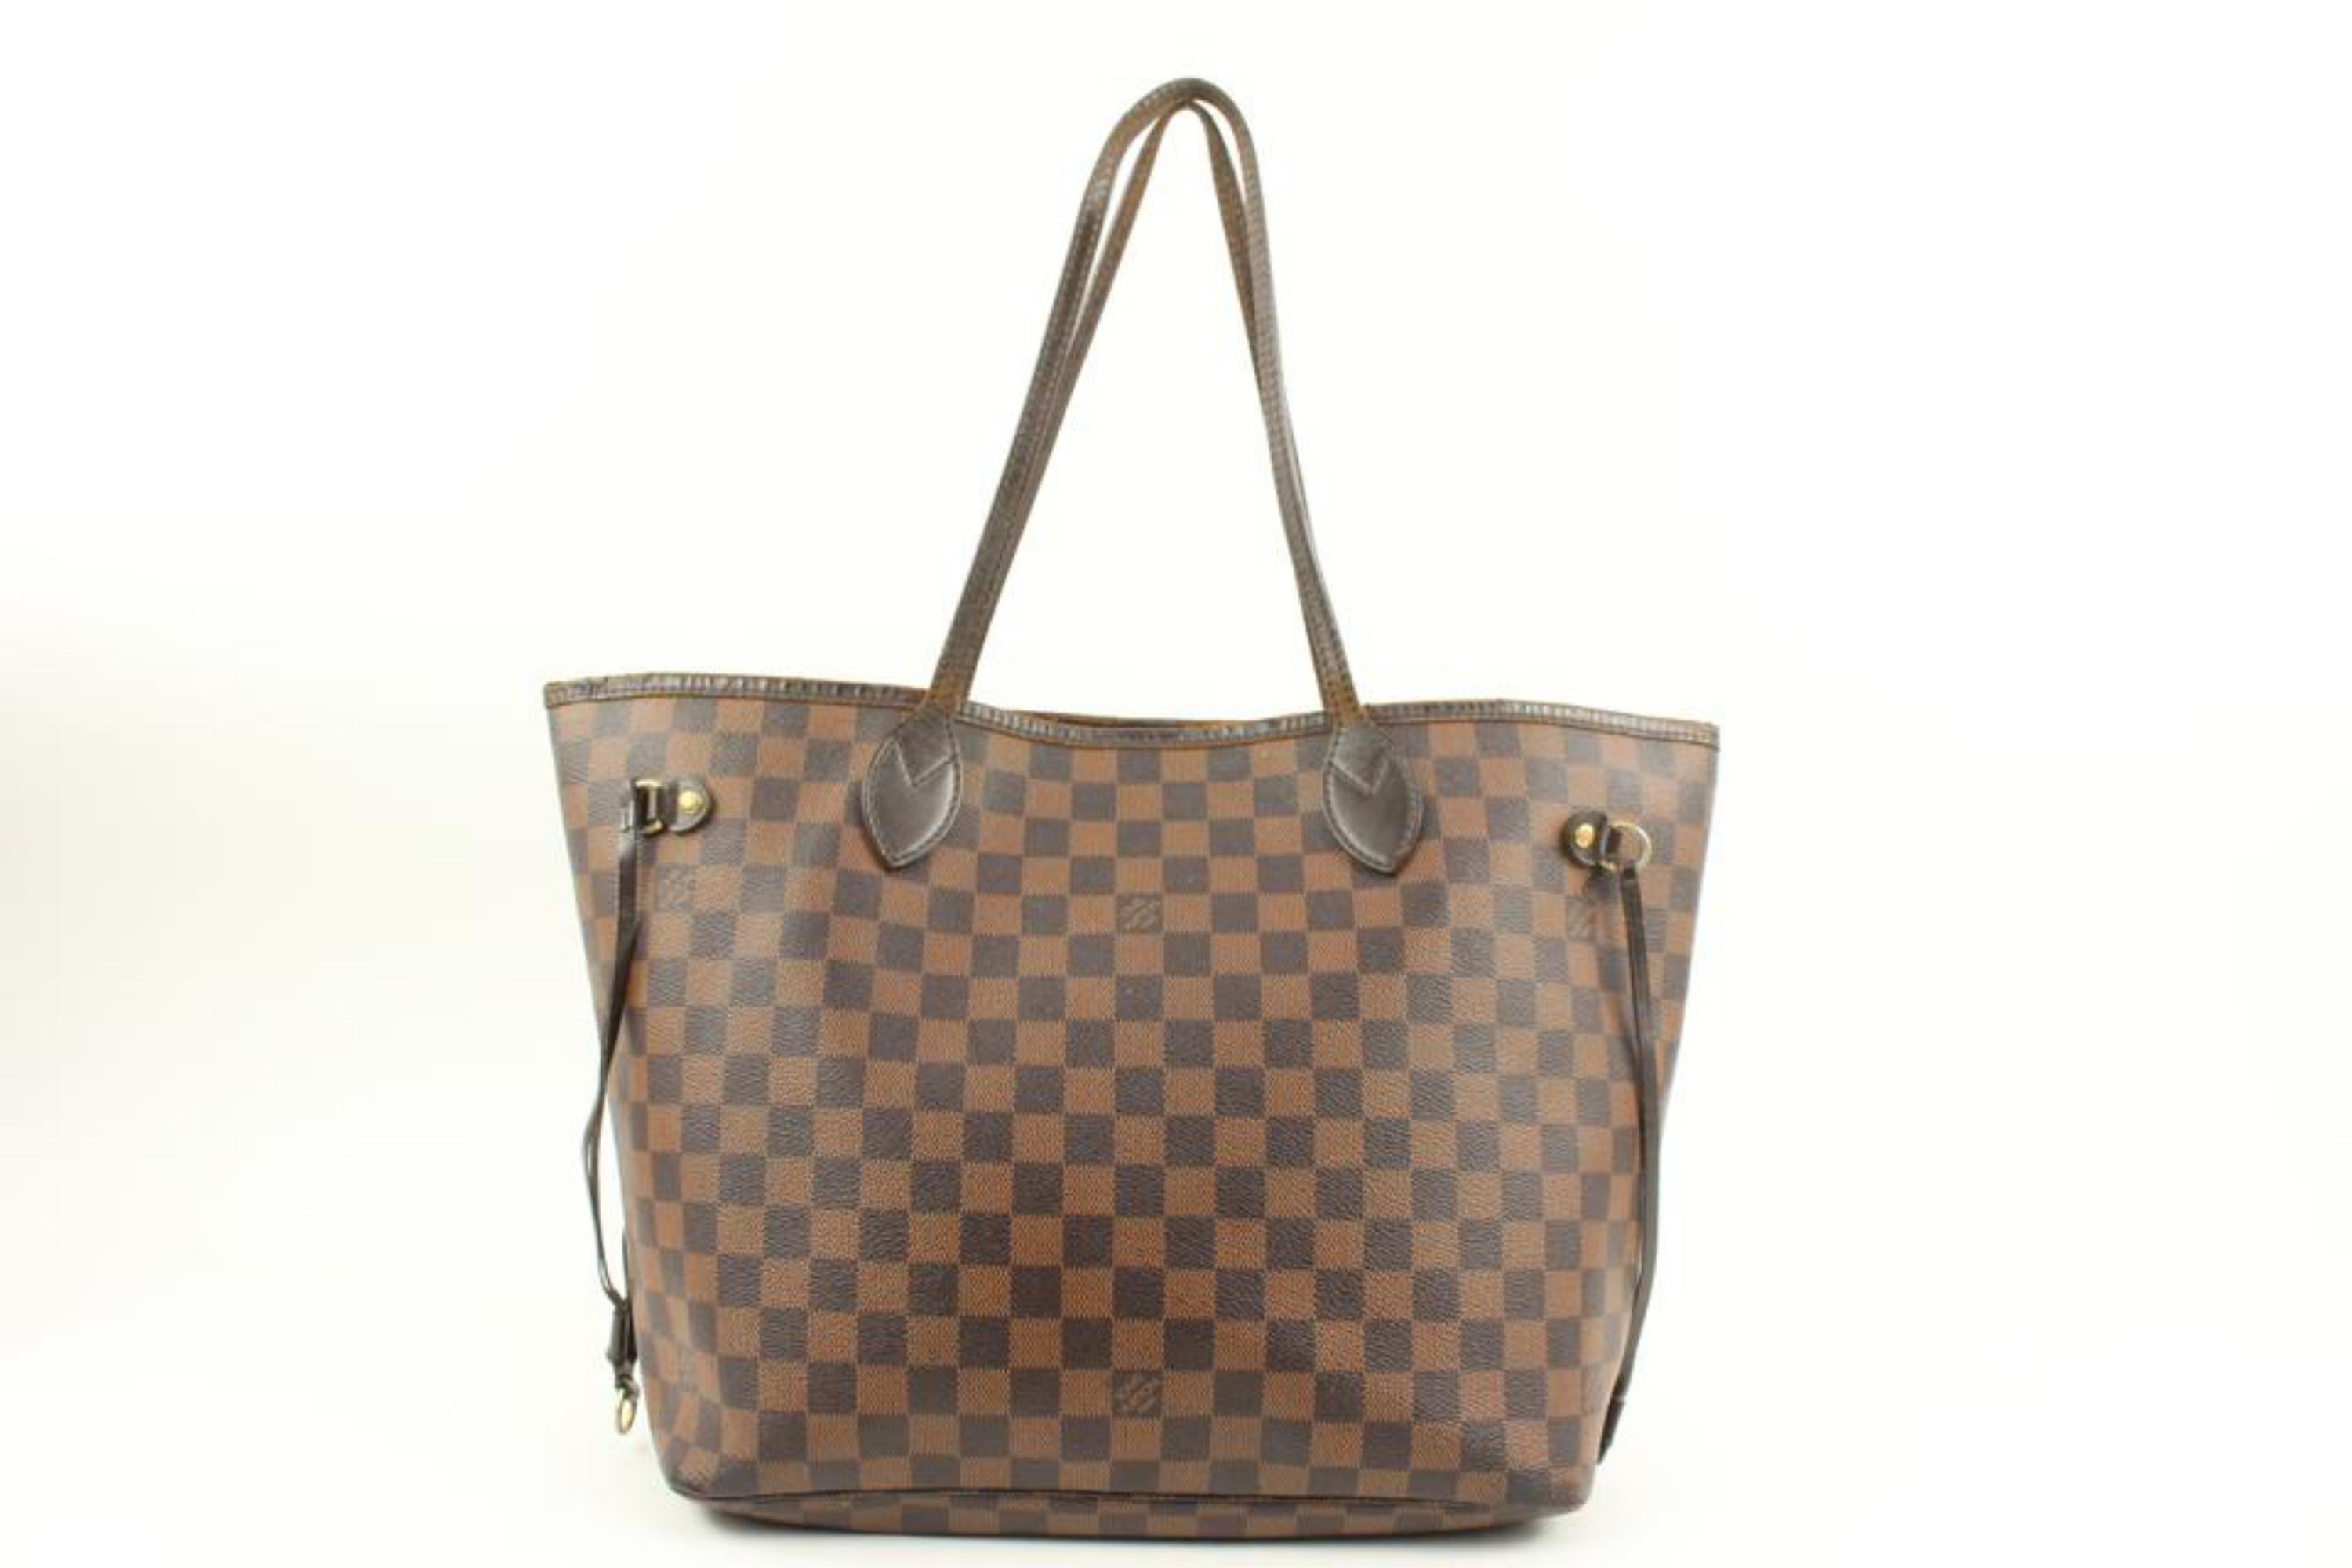 Louis Vuitton Damier Ebene Neverfull MM Tote bag 21lv31s In Fair Condition For Sale In Dix hills, NY